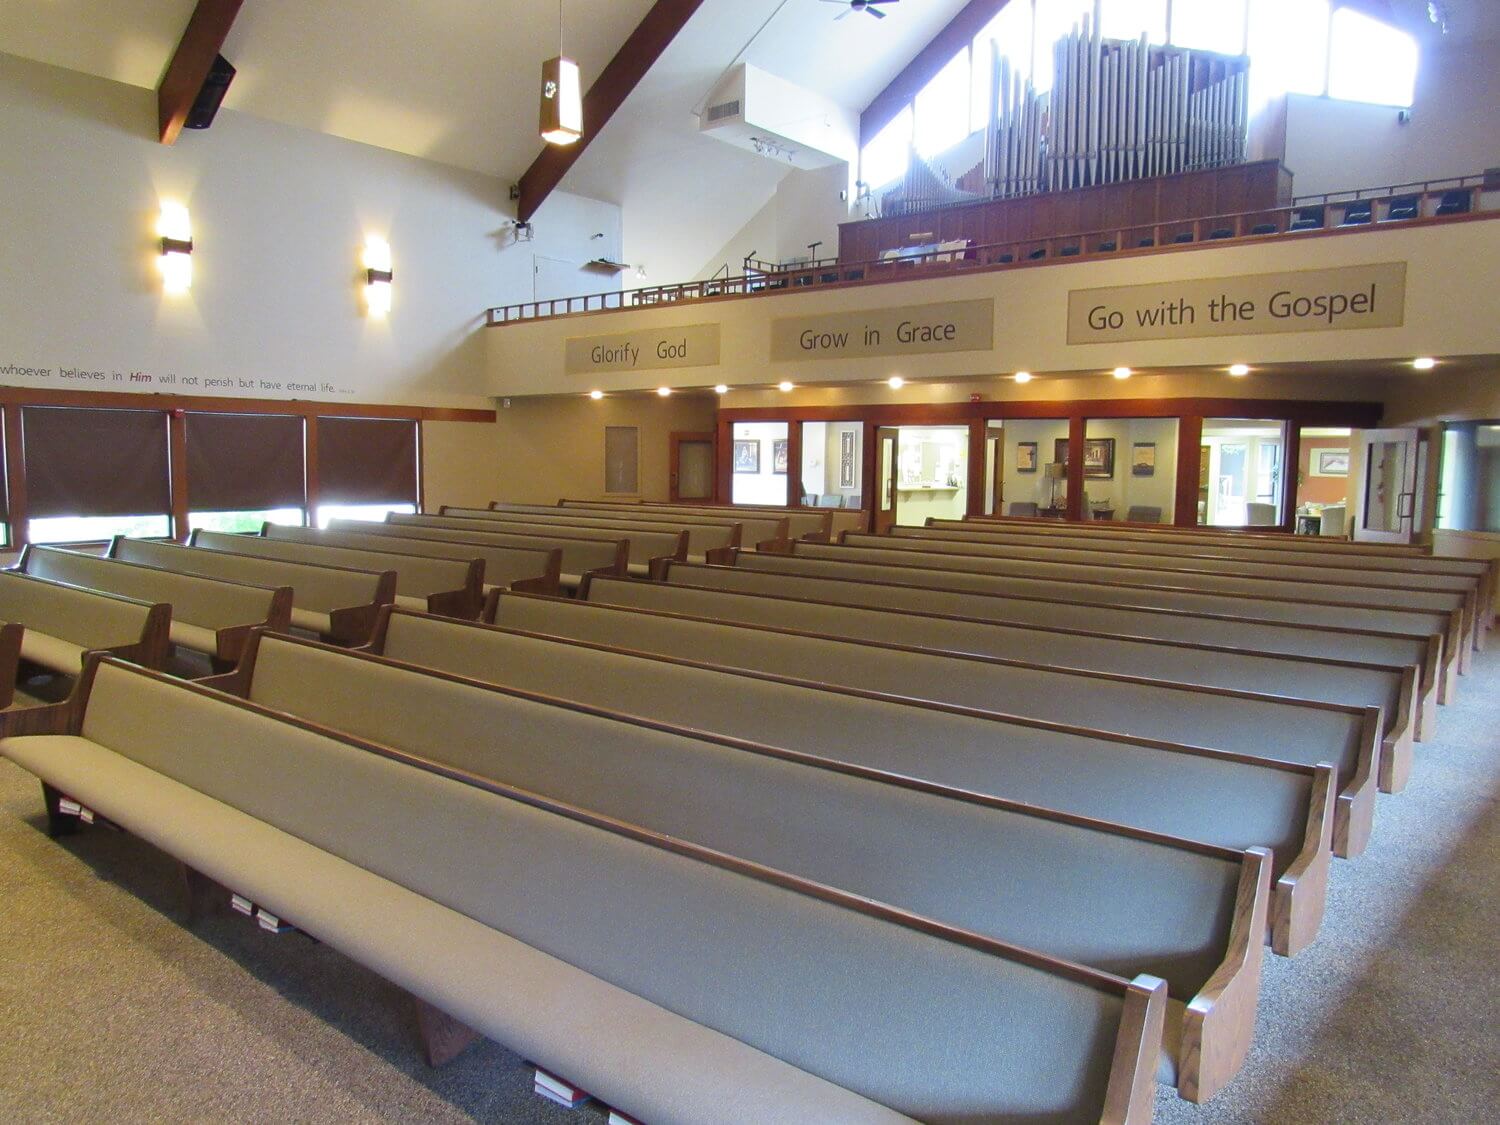 The back of the sanctuary